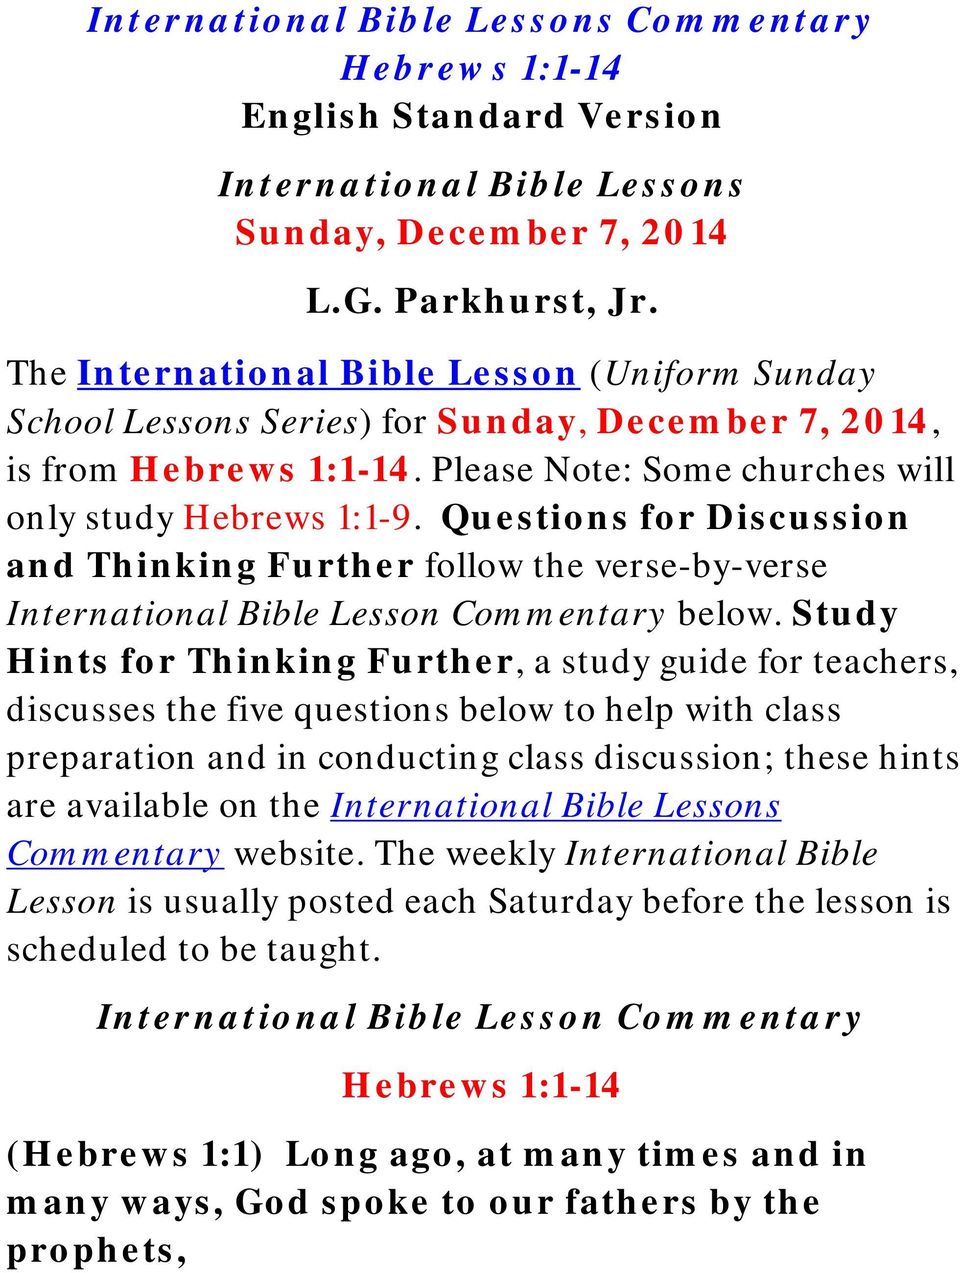 Questions for Discussion and Thinking Further follow the verse-by-verse International Bible Lesson Commentary below.